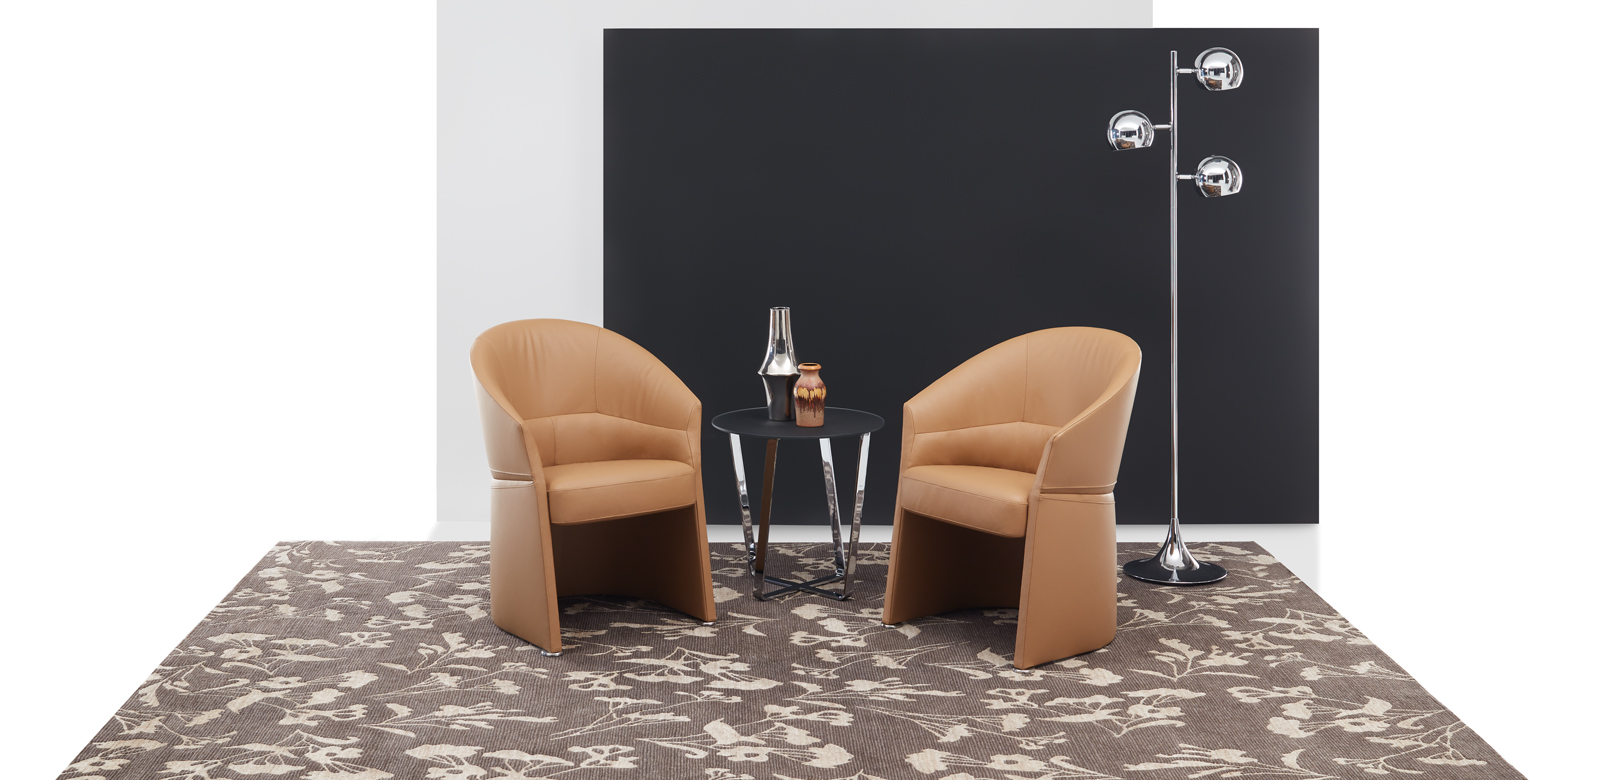 Armchair CL128 in light brown leather on decorated dark brown carpet